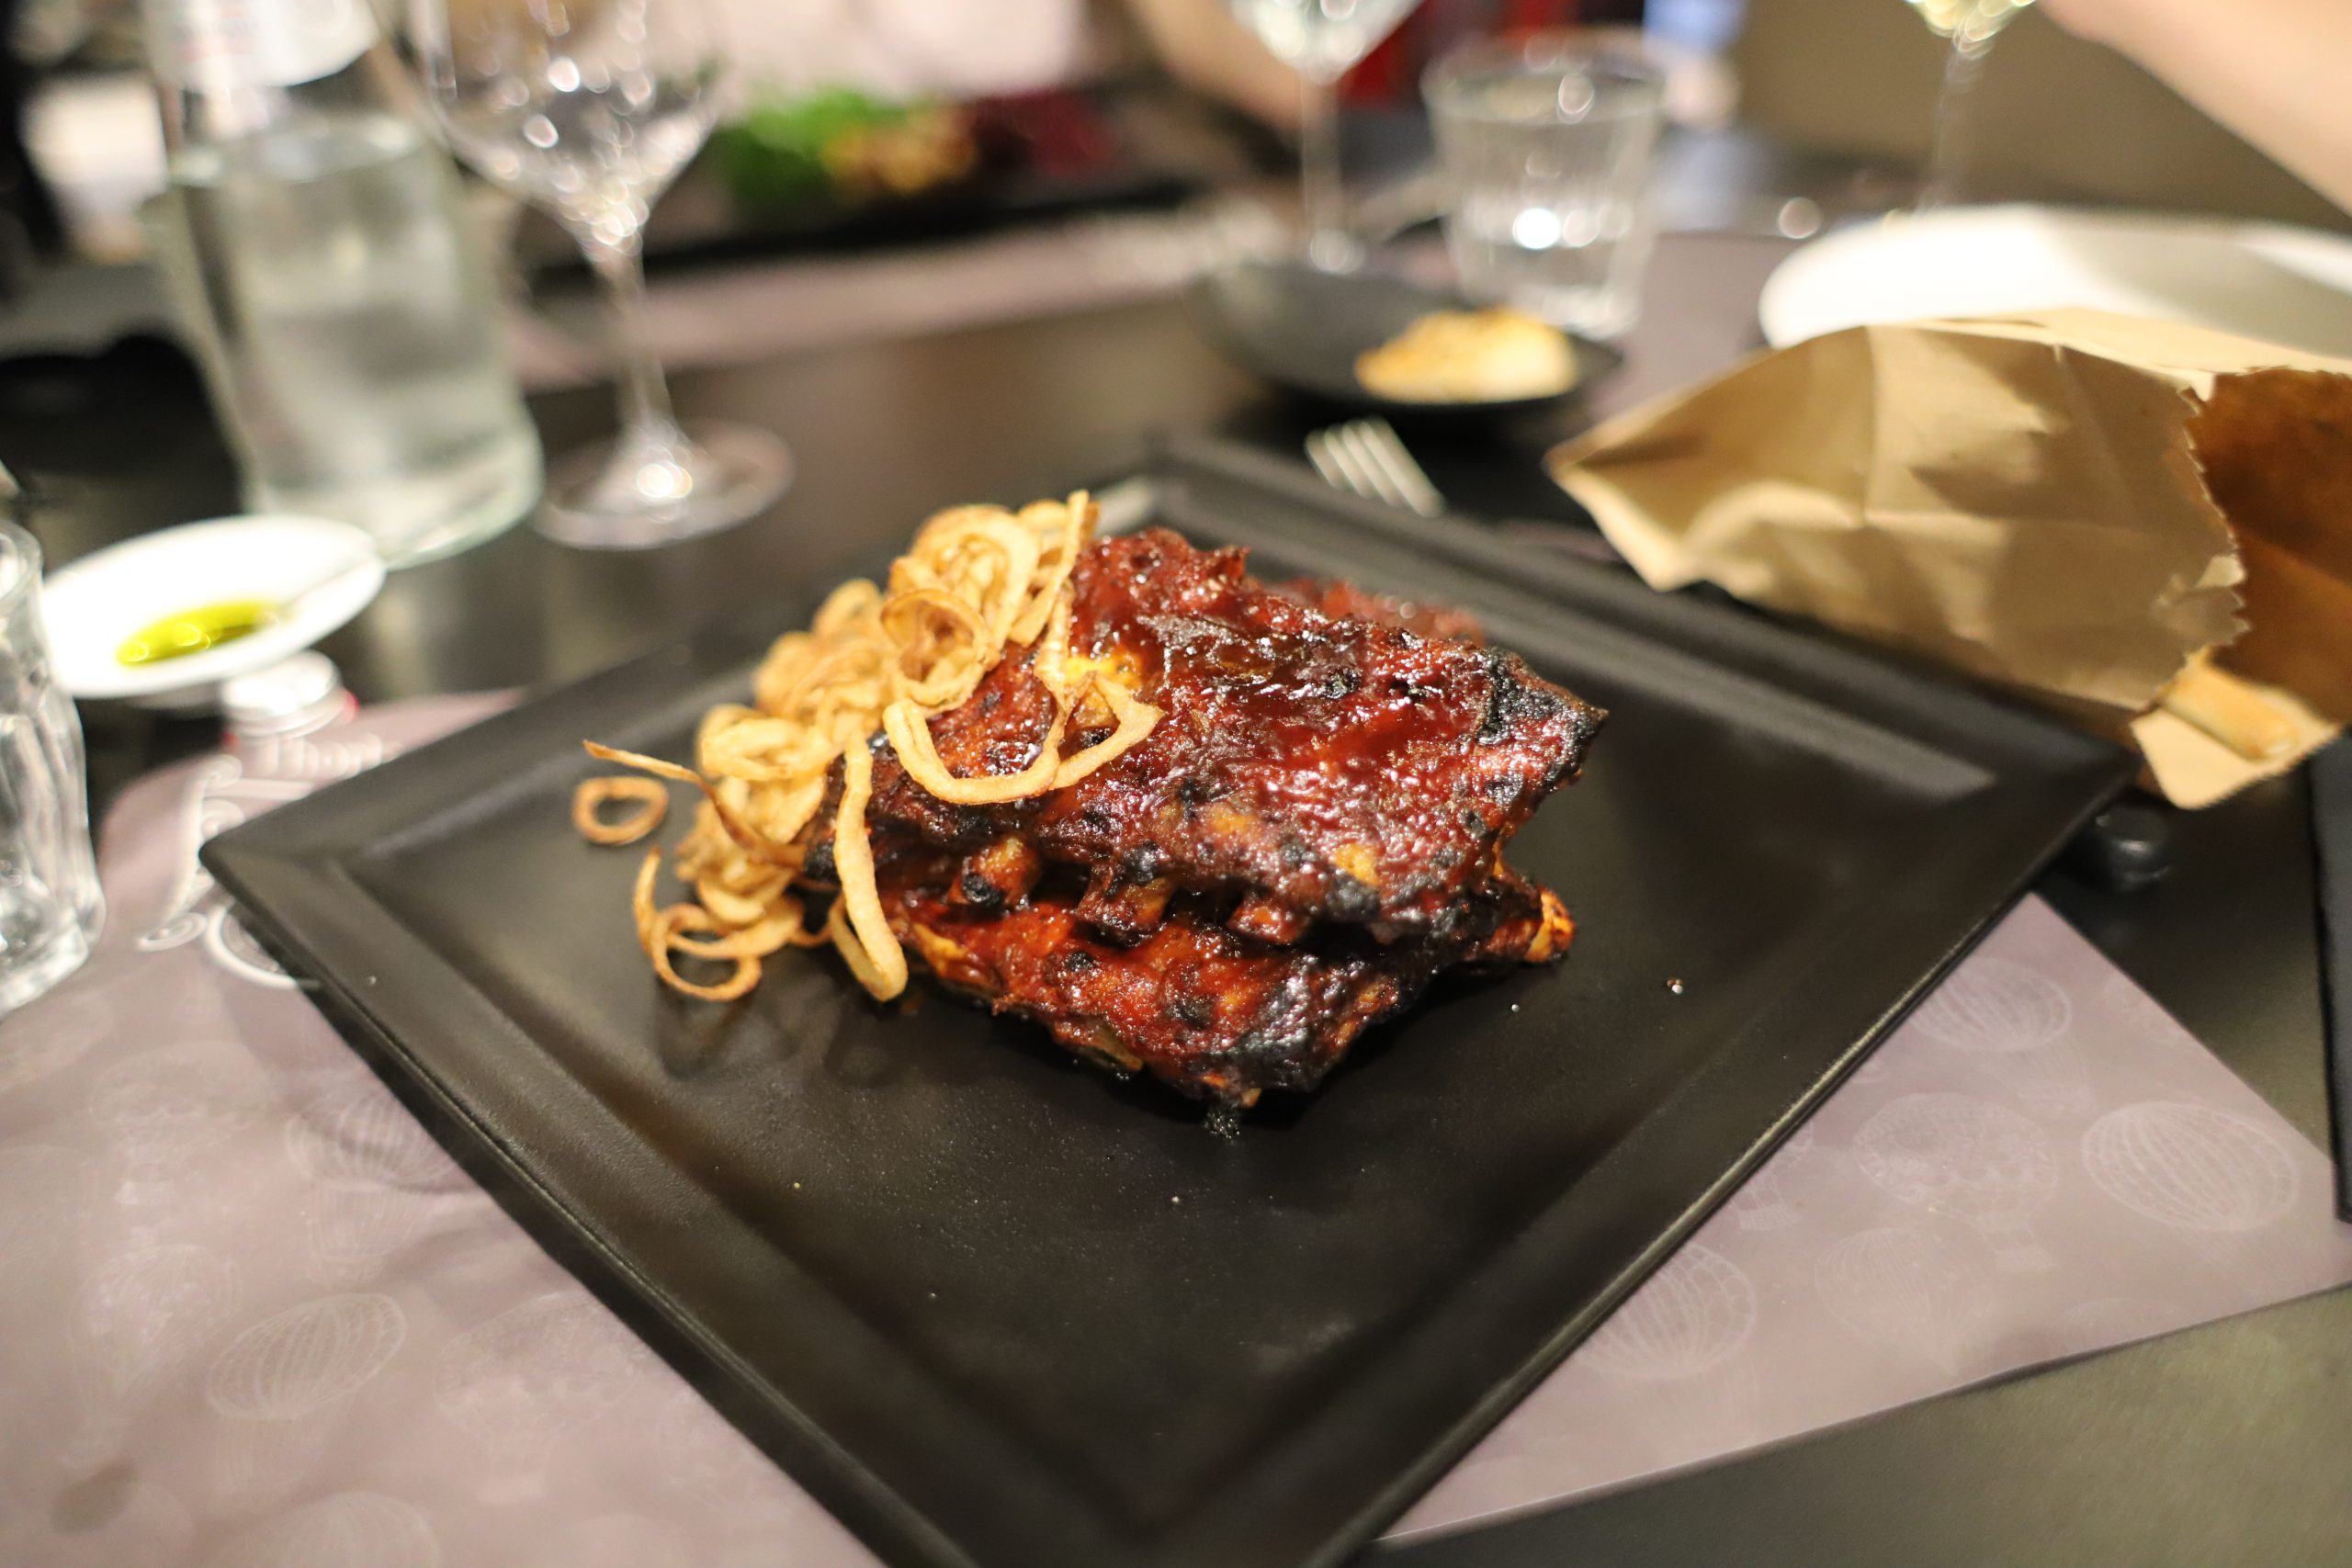 Barbequed Pork Ribs with Fried Onions